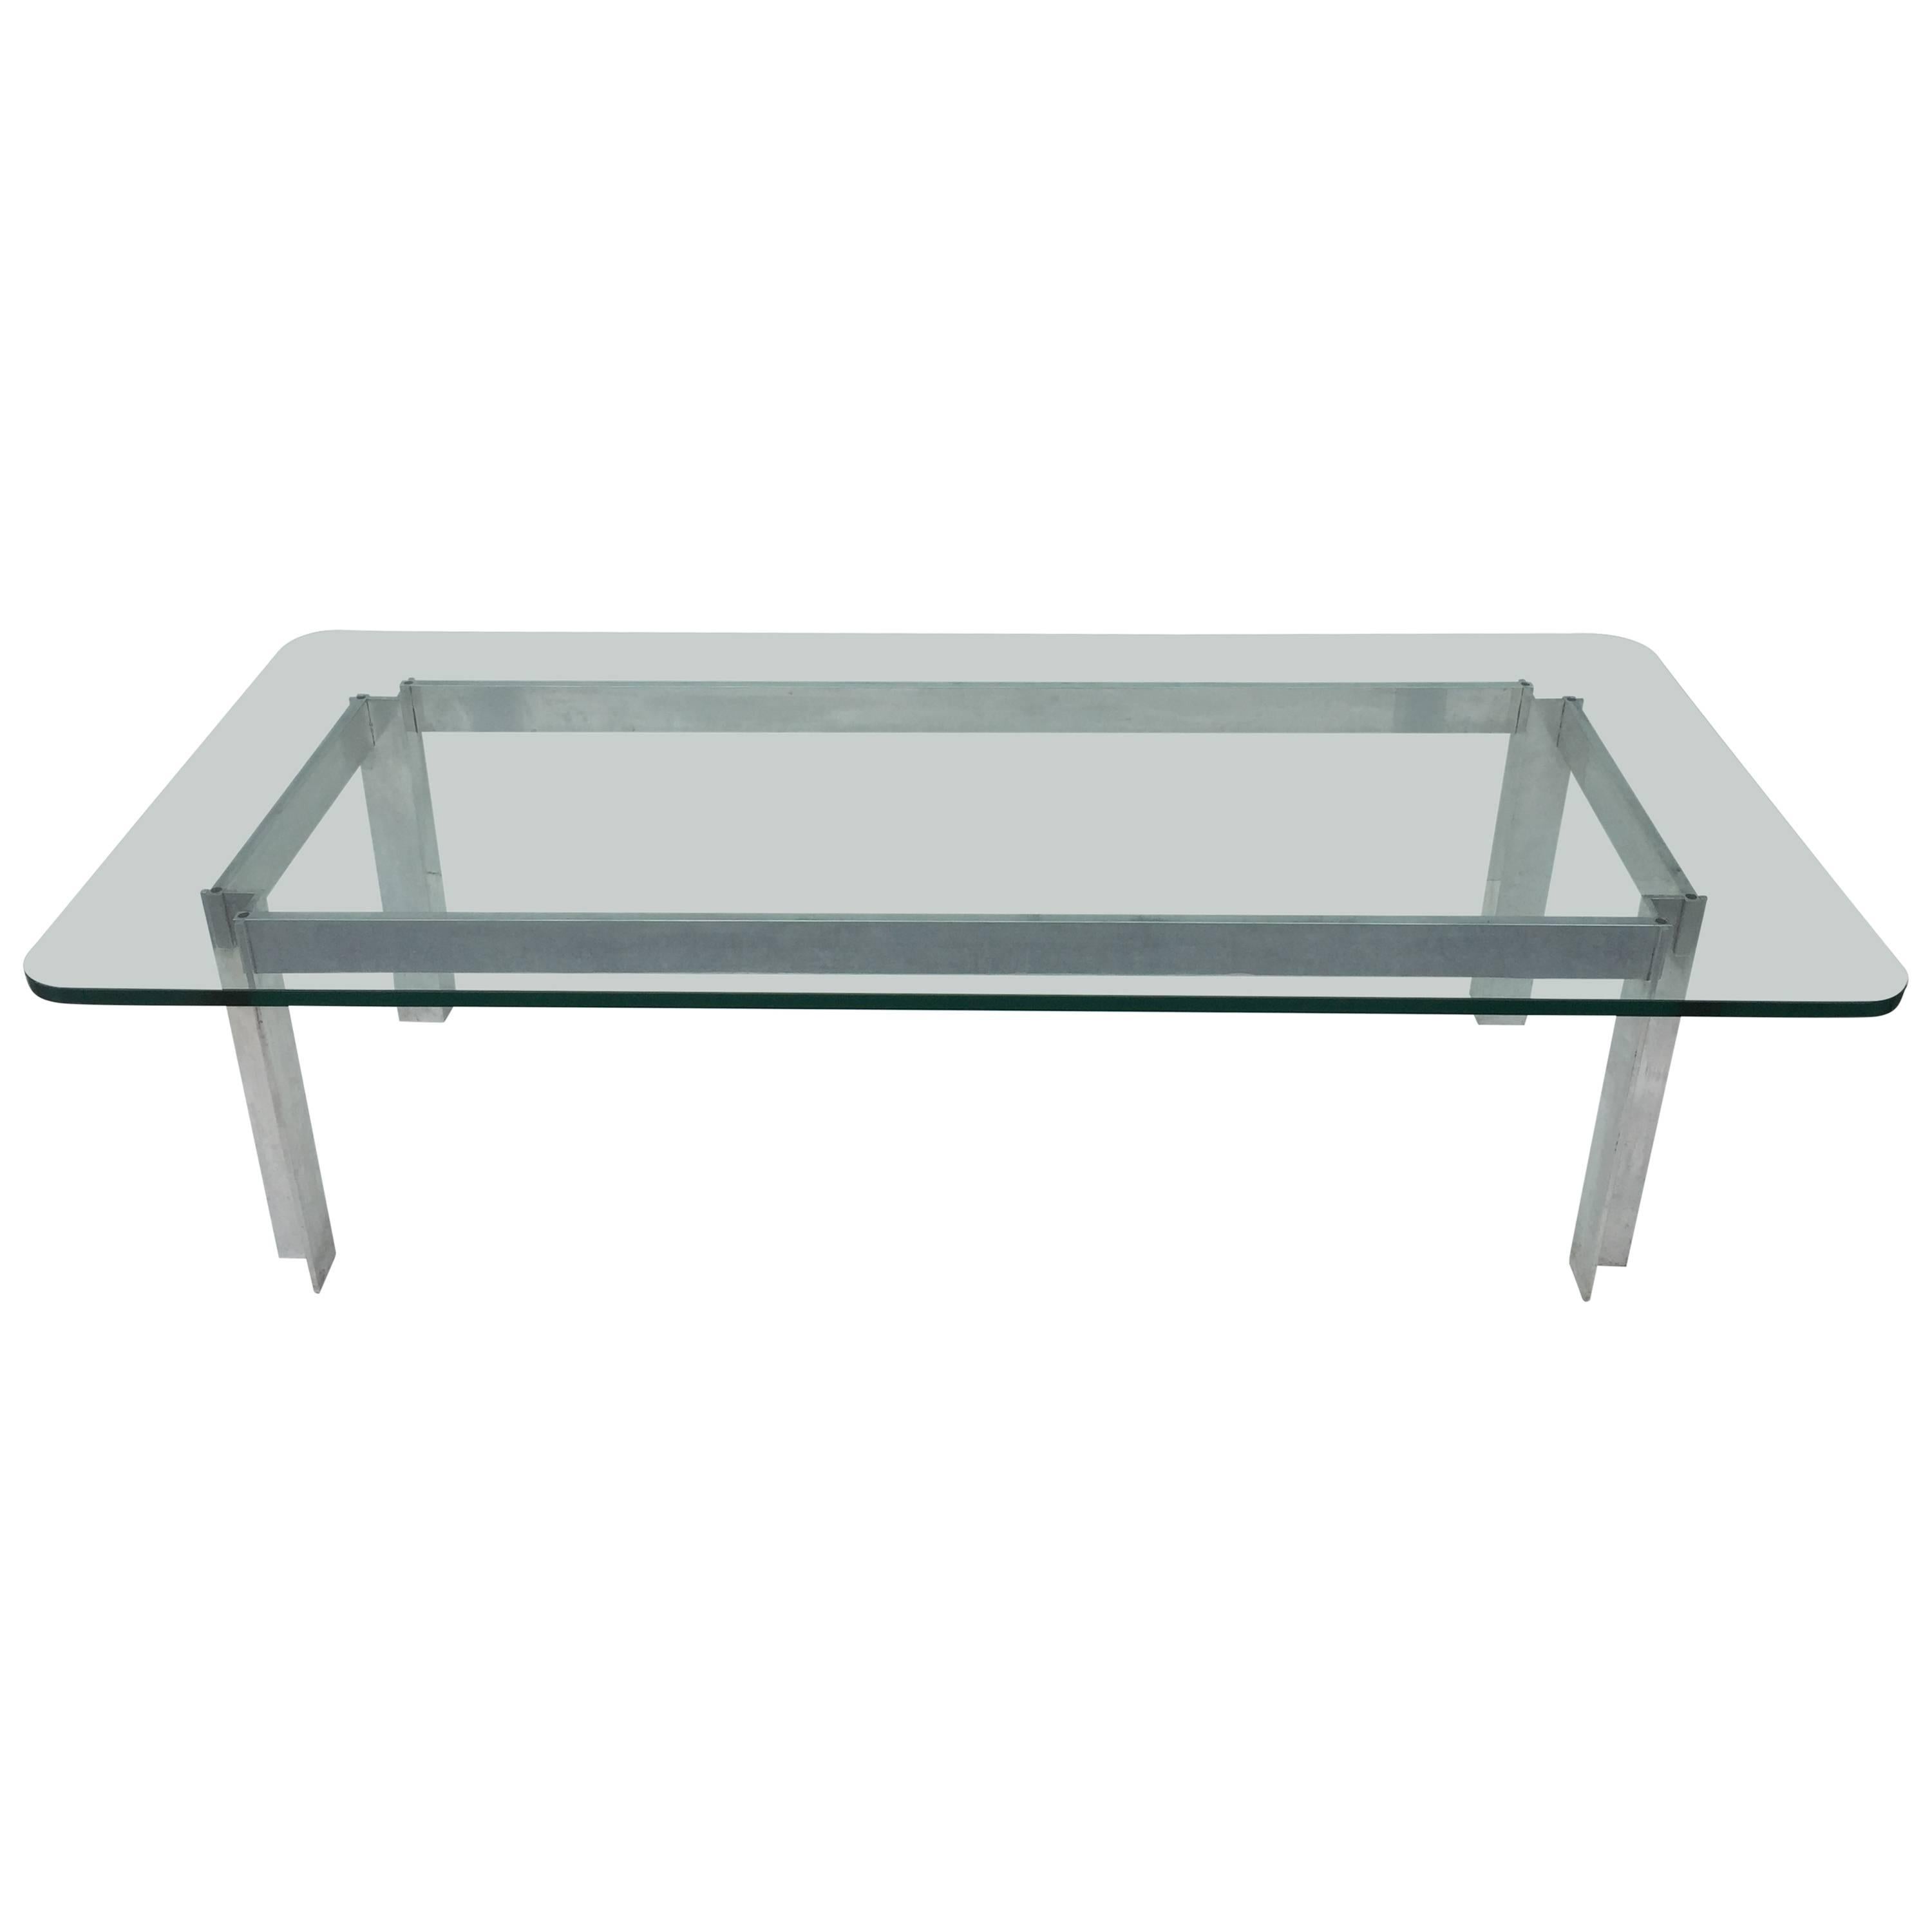 Poul Kjaerholm Attributed Cocktail Table For Sale